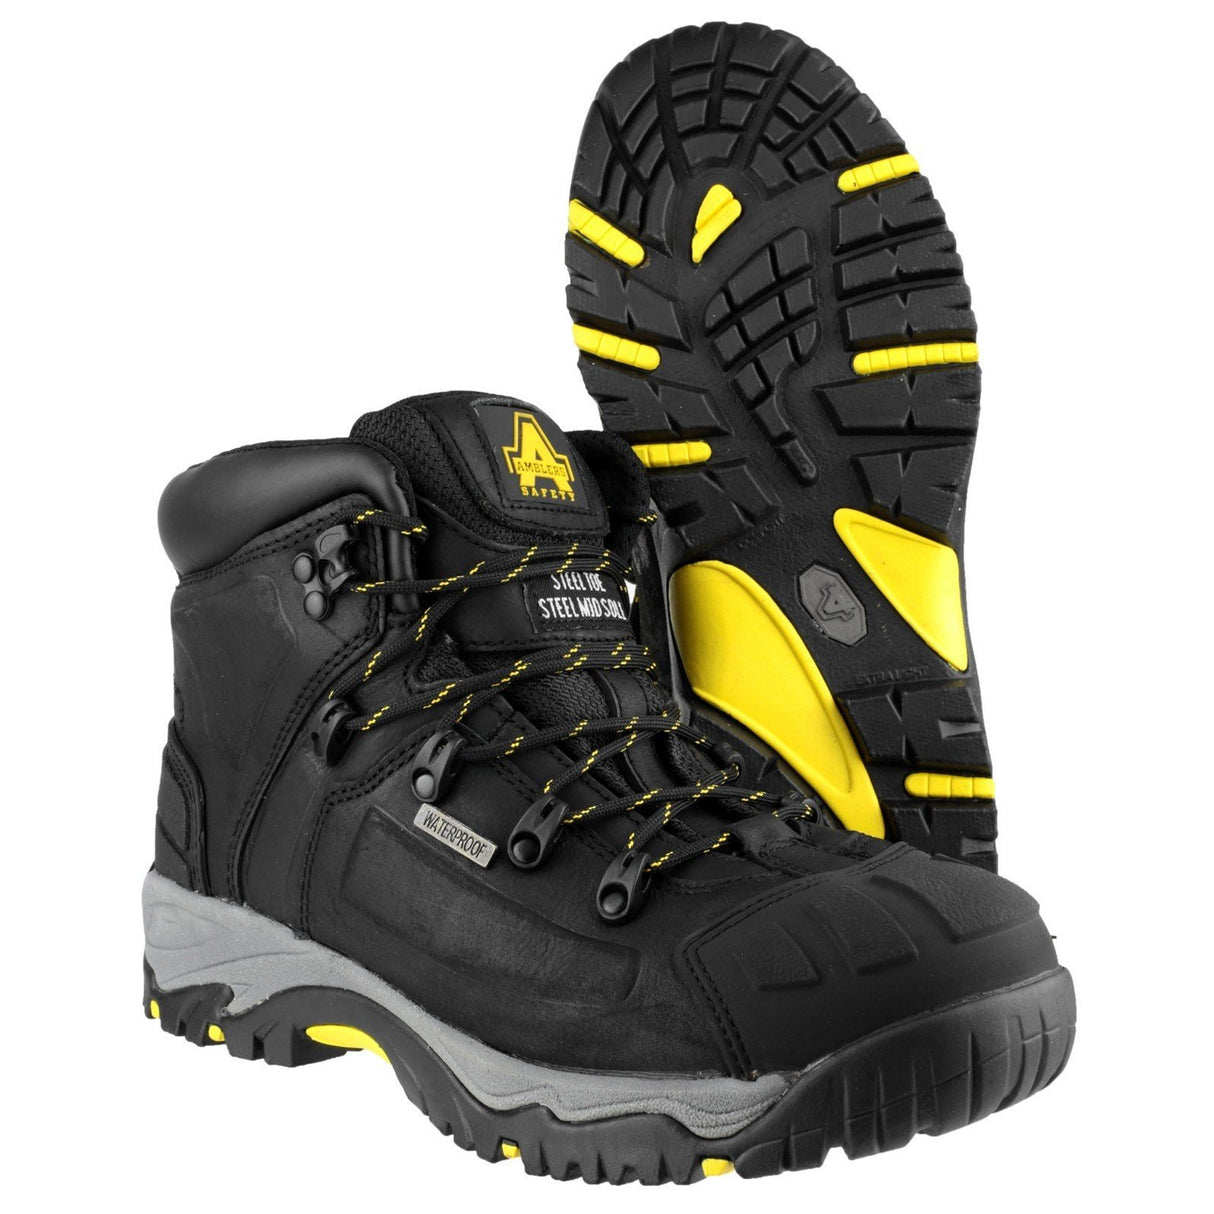 Amblers Safety Black Scuff Cap Safety Boots